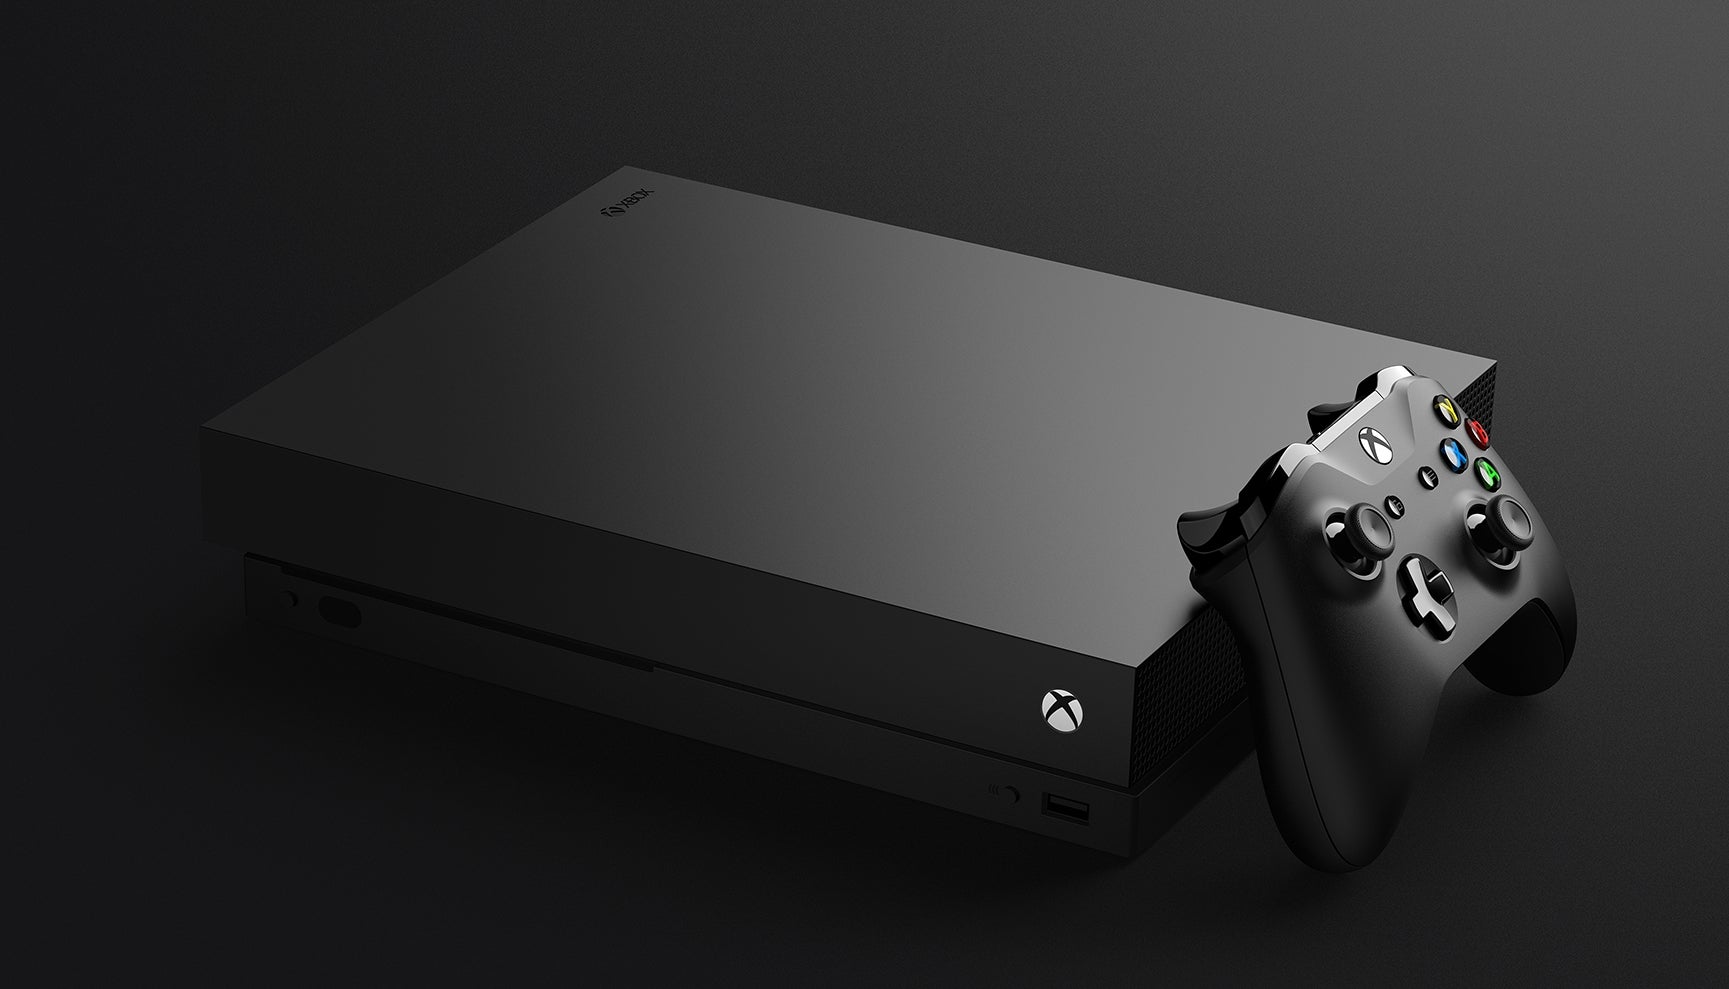 Image for You can't pre-order the Xbox One X just yet, but many retailers would love to email you when it's time